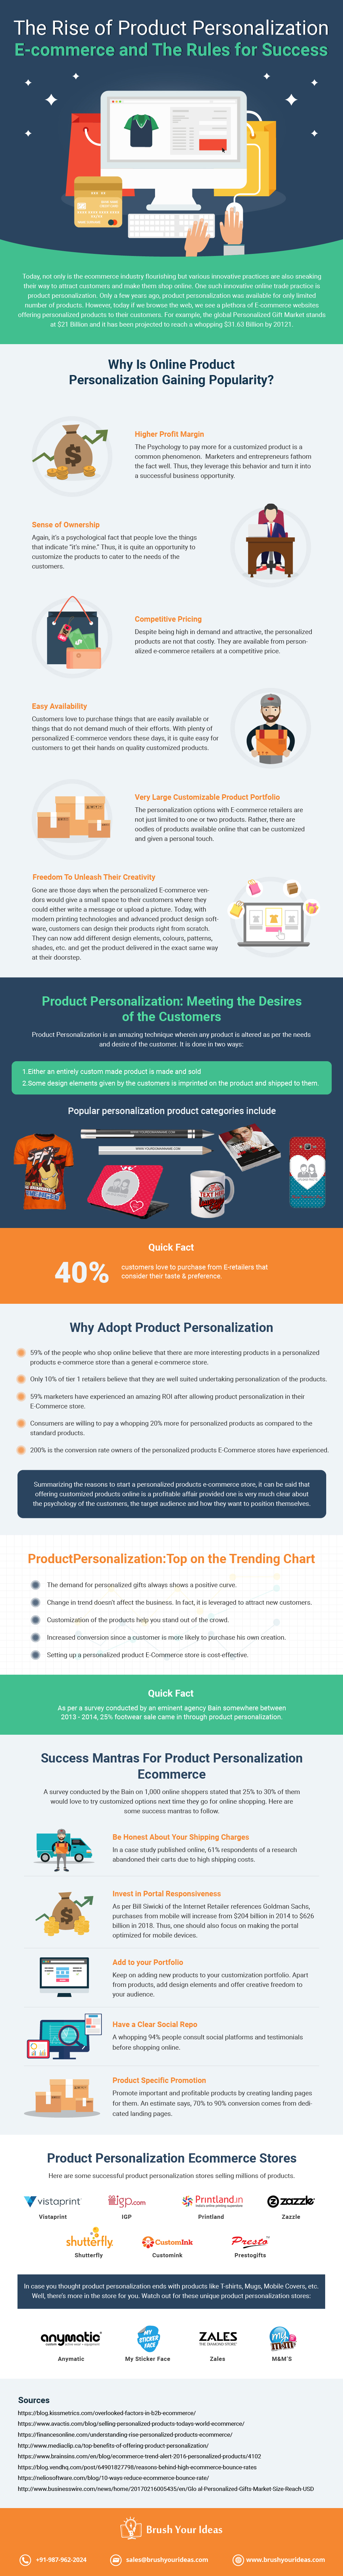 The Rise of Product Personalization E-commerce and The Rules for Success